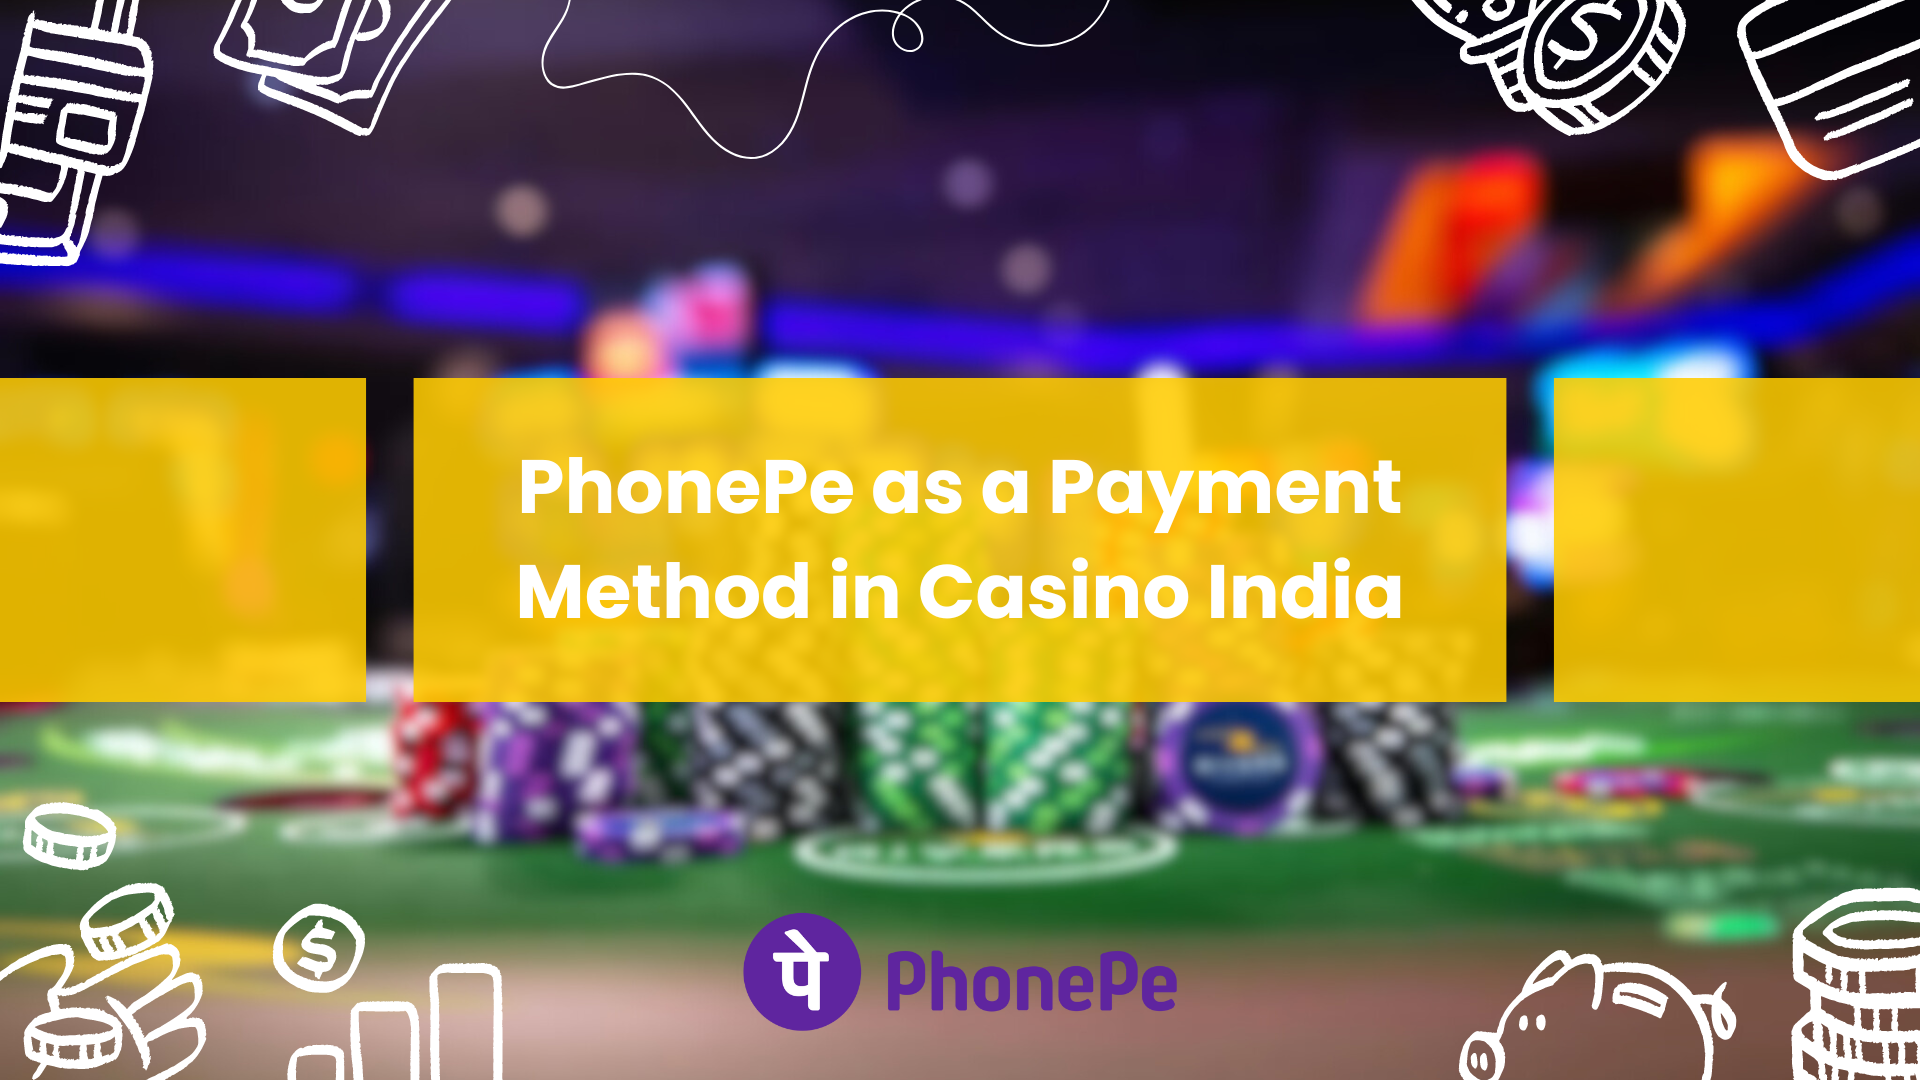 PhonePe as a Payment Method in Casino India